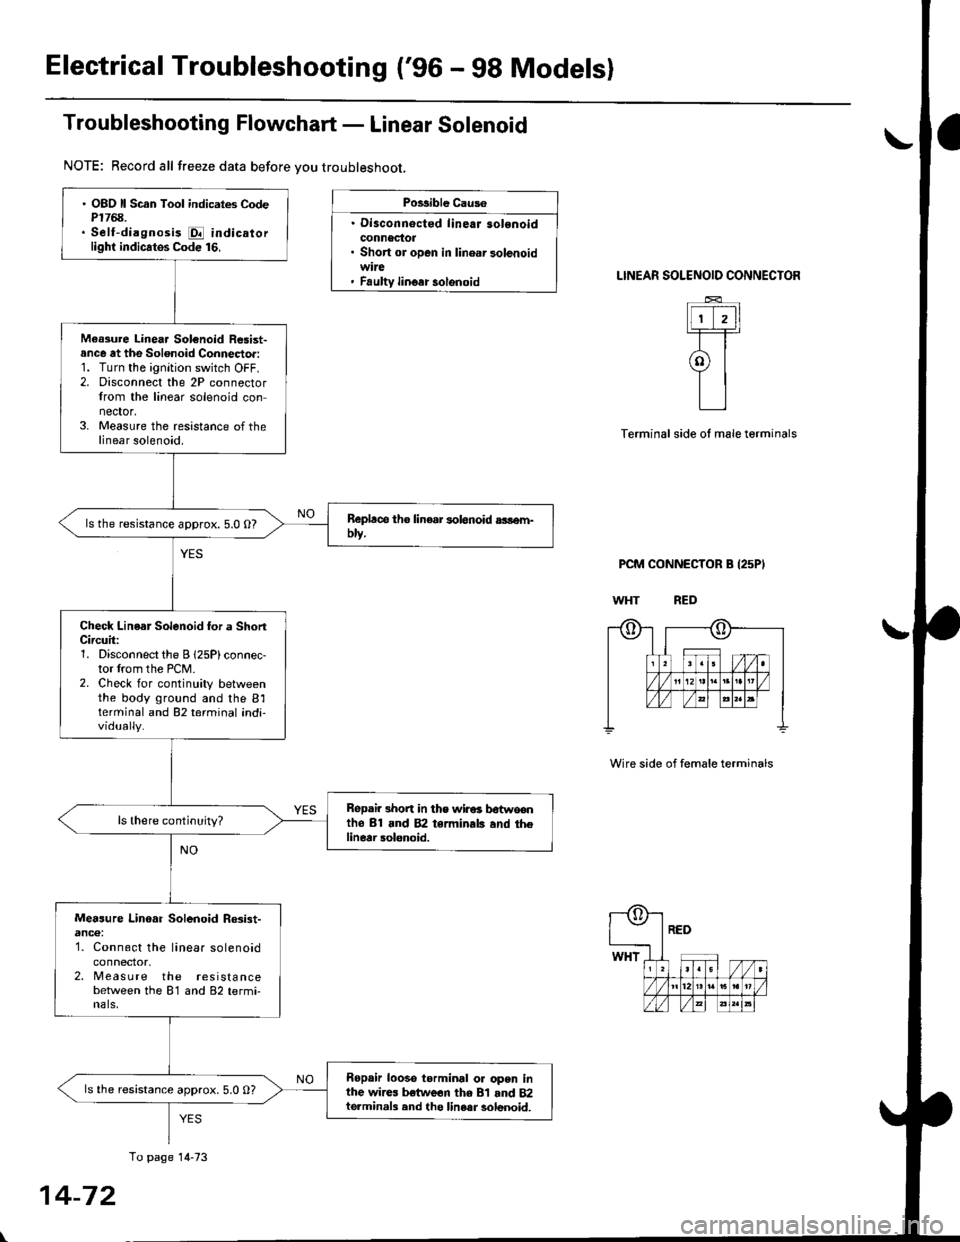 HONDA CIVIC 1999 6.G Workshop Manual Electrical Troubleshooting (96 - 98 Modelsl
Troubleshooting Flowchart - Linear Solenoid
NOTE: Record all freeze data before vou troubleshoot,
Po$ible Caus6
. Disconnoctod lineaJ solonoidconnectot. Sh